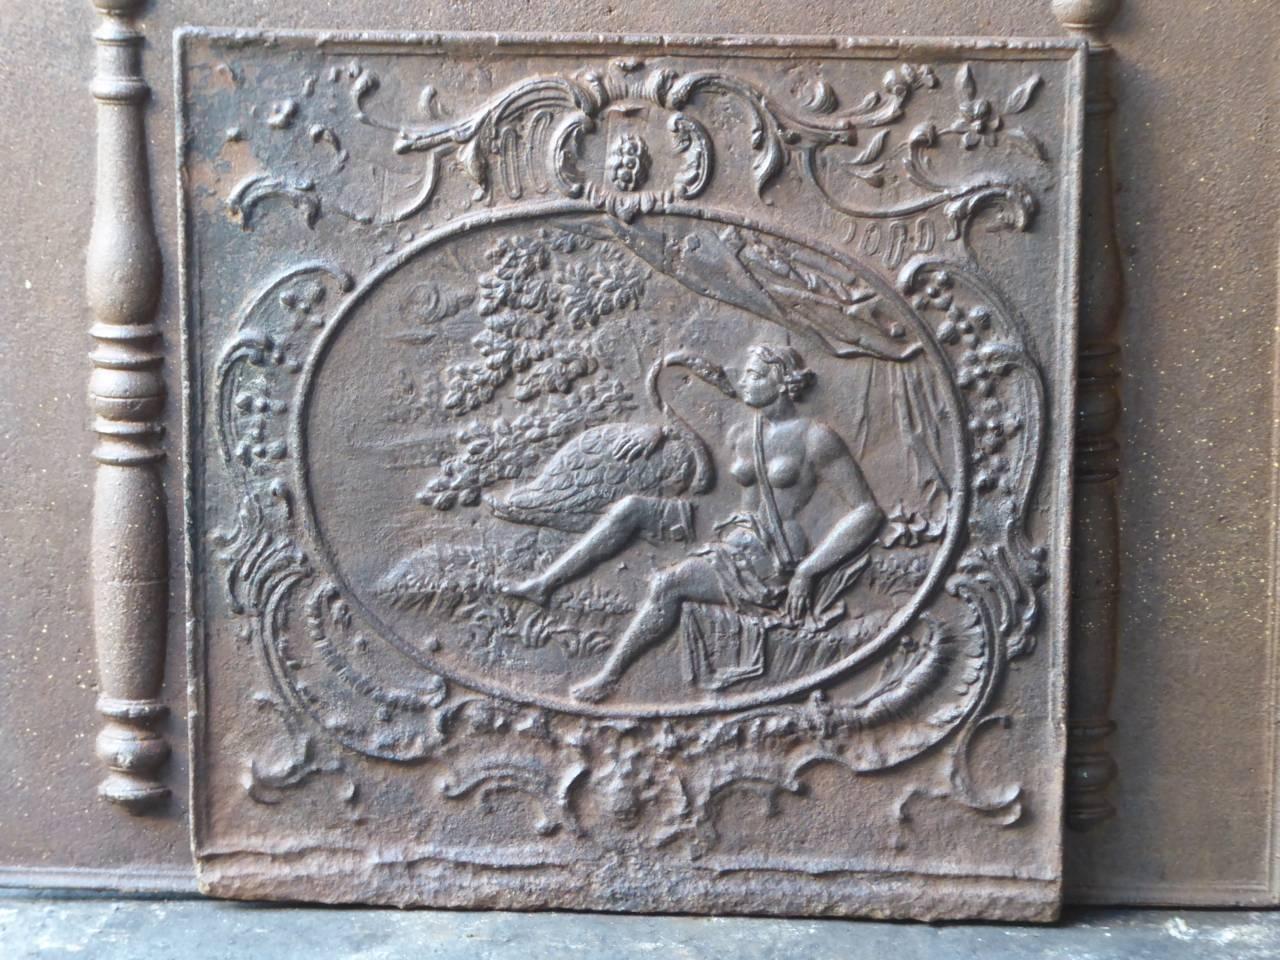 18th century French fireback with Zeus and Leda. Zeus transformed himself into a swan to seduce the beautiful Leda.

We have a unique and specialized collection of antique and used fireplace accessories consisting of more than 1000 listings at